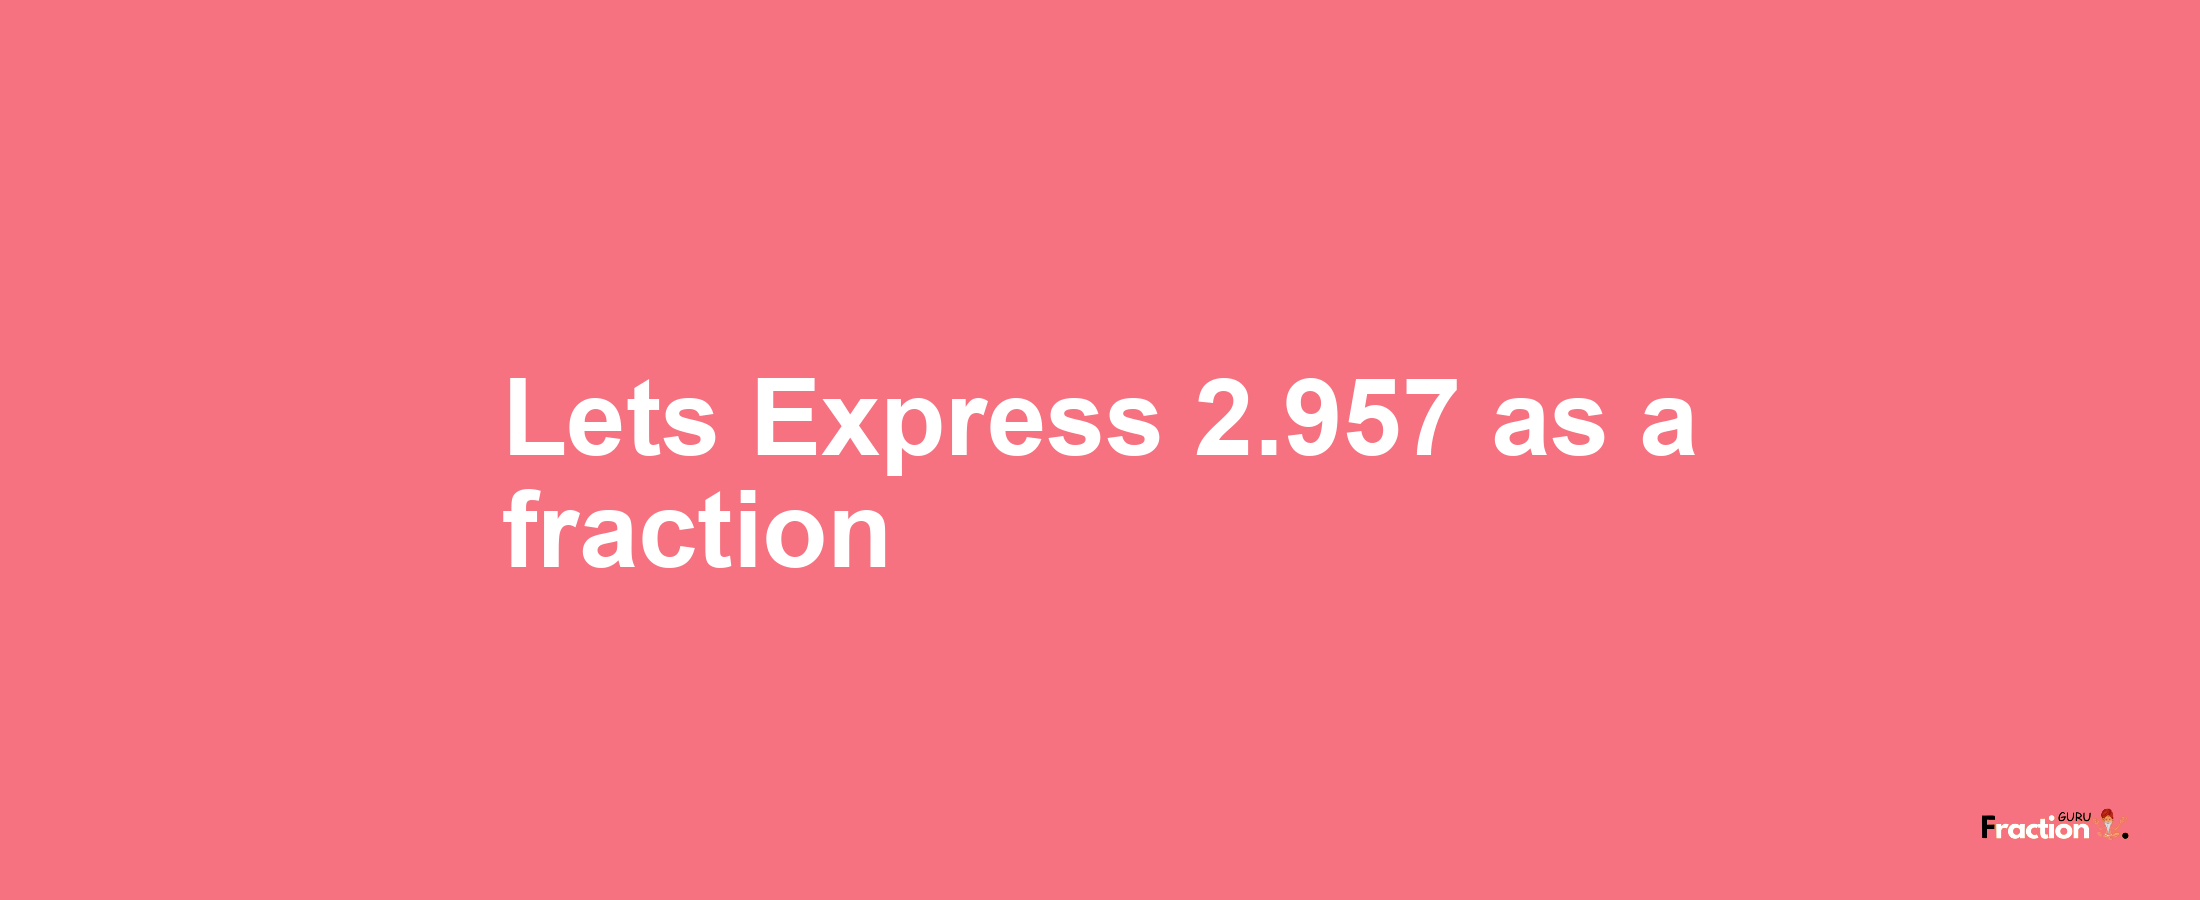 Lets Express 2.957 as afraction